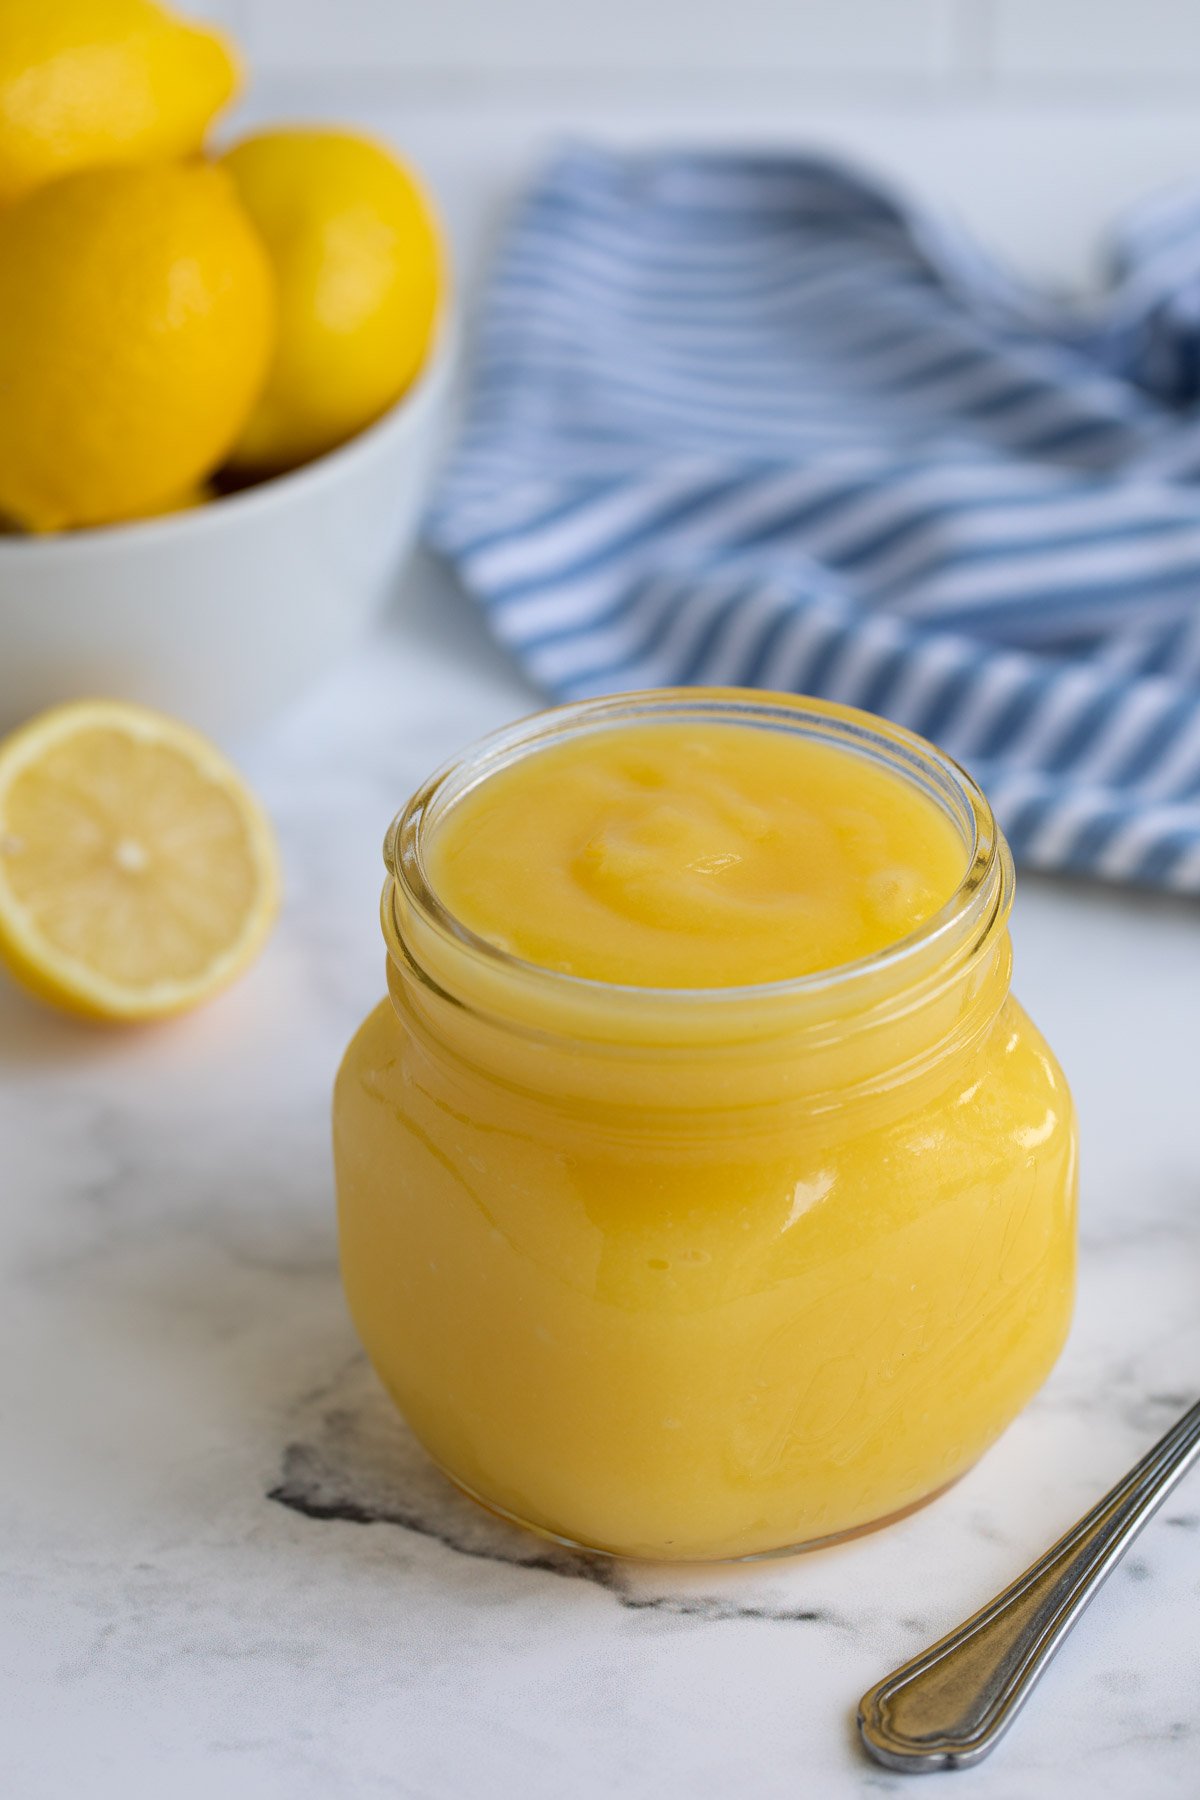 A jar of microwave lemon curd by a bowl of lemons and a striped towel.